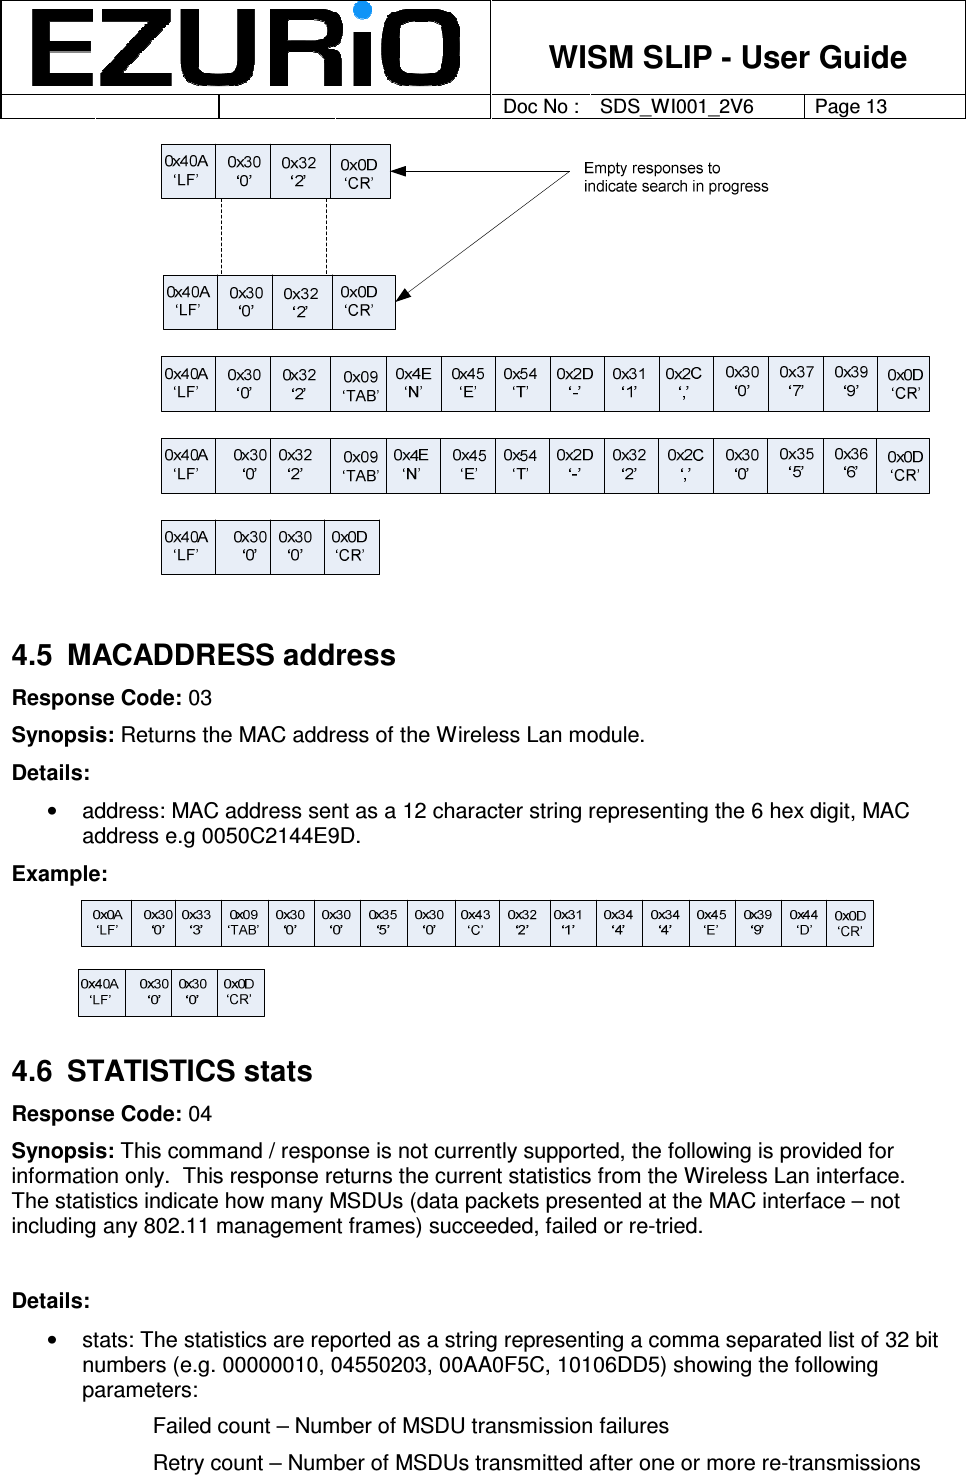    WISM SLIP - User Guide         Doc No : SDS_WI001_2V6 Page 13      4.5  MACADDRESS address Response Code: 03 Synopsis: Returns the MAC address of the Wireless Lan module.  Details:  •  address: MAC address sent as a 12 character string representing the 6 hex digit, MAC address e.g 0050C2144E9D. Example:  4.6  STATISTICS stats Response Code: 04 Synopsis: This command / response is not currently supported, the following is provided for information only.  This response returns the current statistics from the Wireless Lan interface. The statistics indicate how many MSDUs (data packets presented at the MAC interface – not including any 802.11 management frames) succeeded, failed or re-tried.   Details: •  stats: The statistics are reported as a string representing a comma separated list of 32 bit numbers (e.g. 00000010, 04550203, 00AA0F5C, 10106DD5) showing the following parameters: Failed count – Number of MSDU transmission failures Retry count – Number of MSDUs transmitted after one or more re-transmissions 